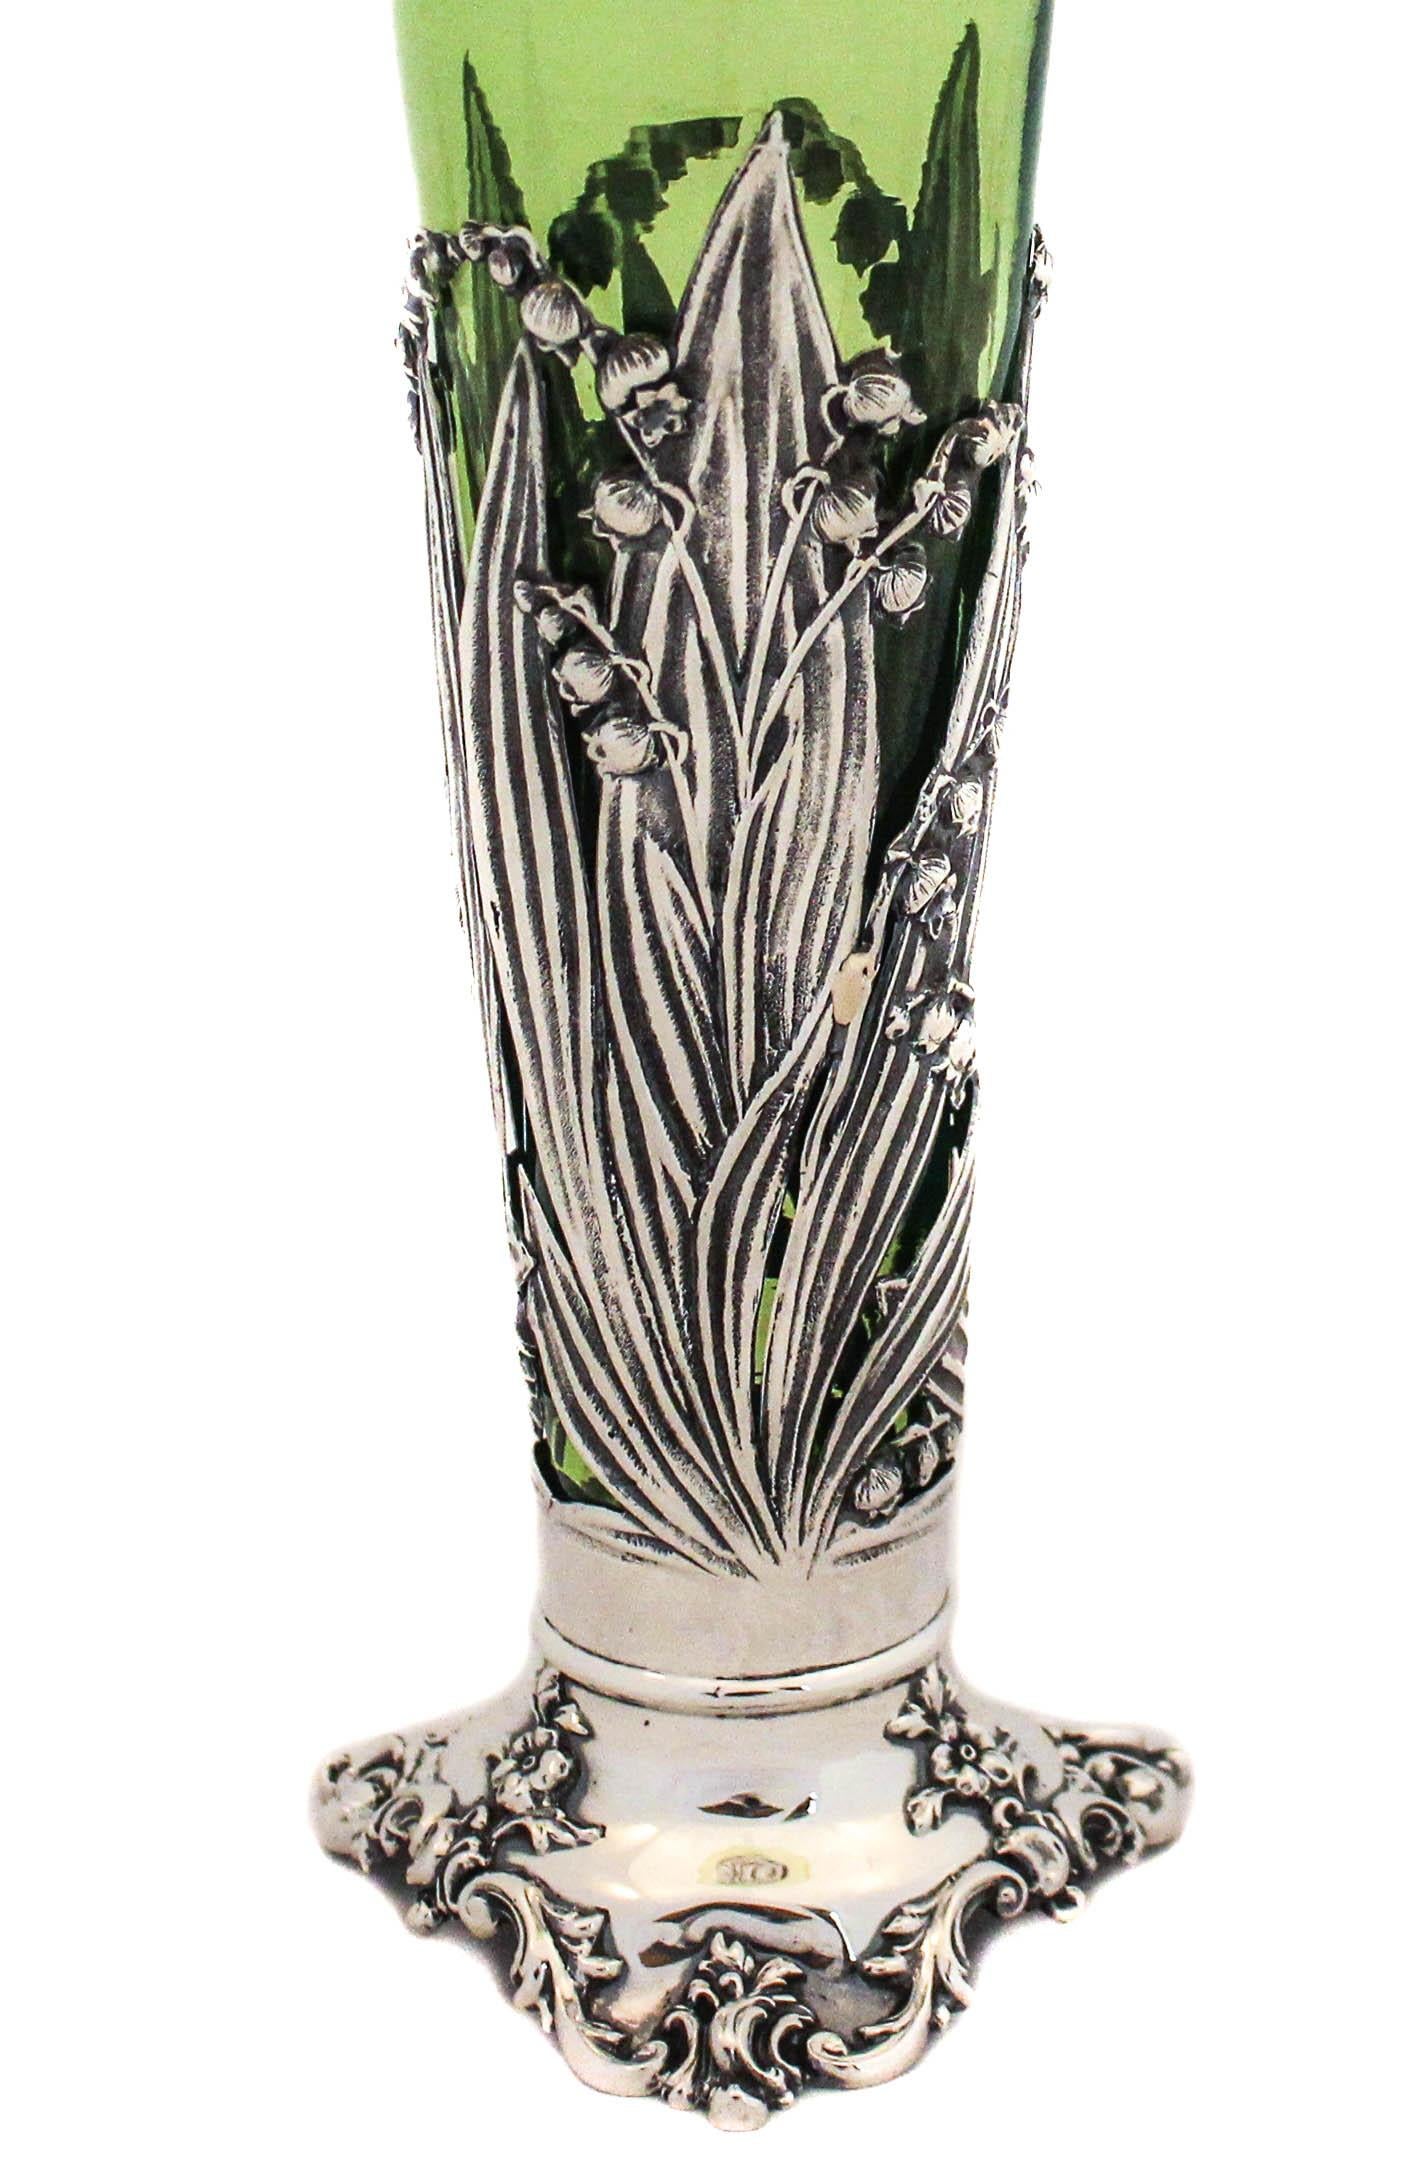 If you love Art Nouveau as much as me, you’ll be very excited by this item. A sterling silver vase with a lime-green liner. The liner is removable so it’s easy to wash, dry and put back in the silver base. The glass rim is fluted in keeping with the